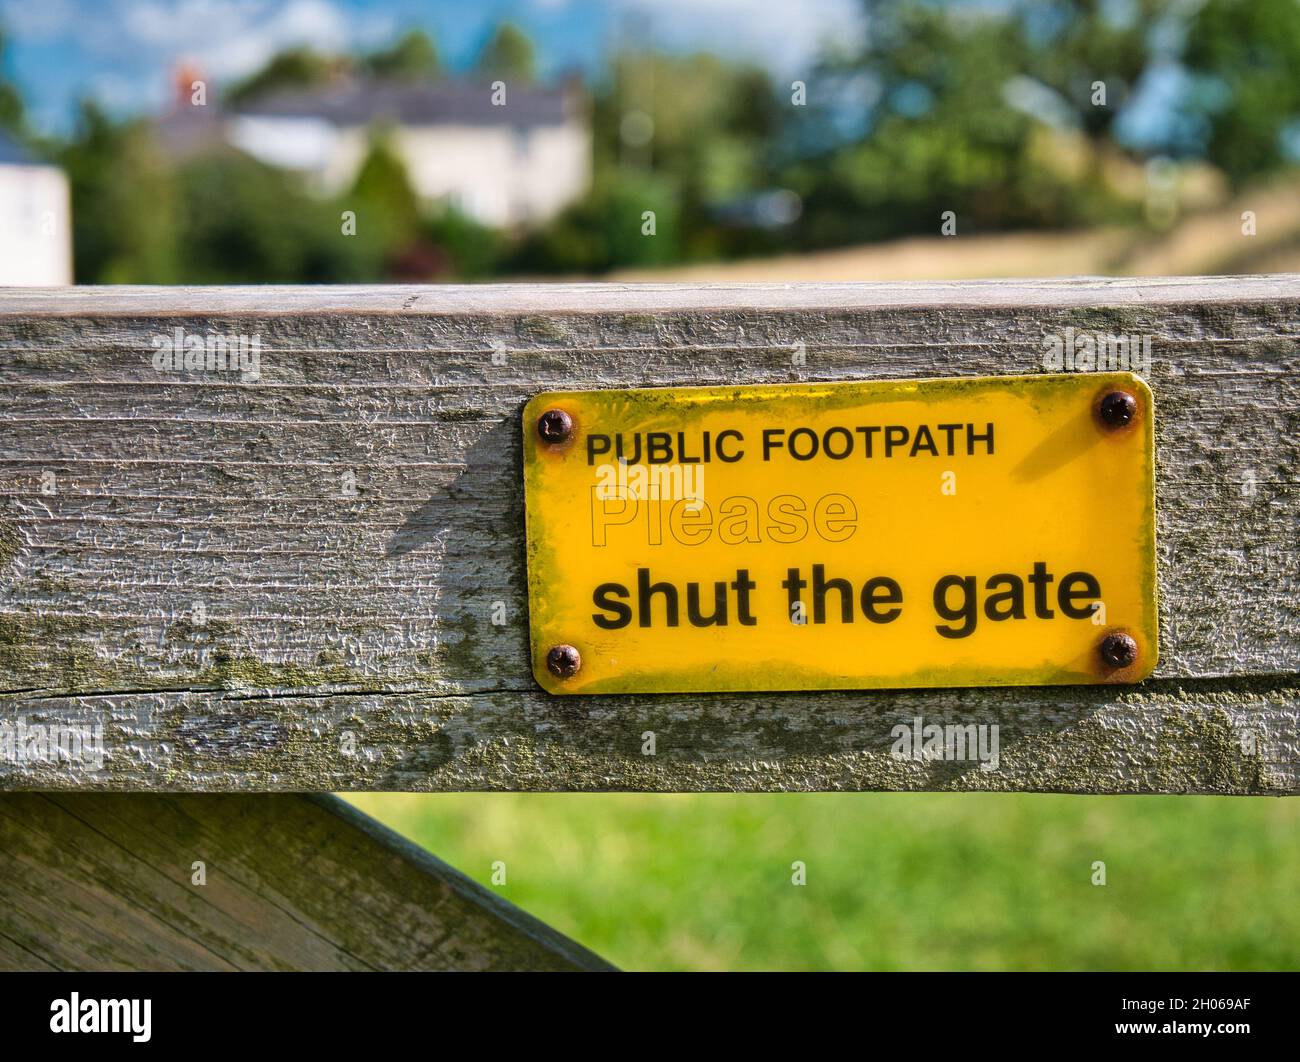 A rectangular, yellow, metal sign screwed to a wooden gate across a public footpath asks walkers to shut the gate after they pass. Stock Photo